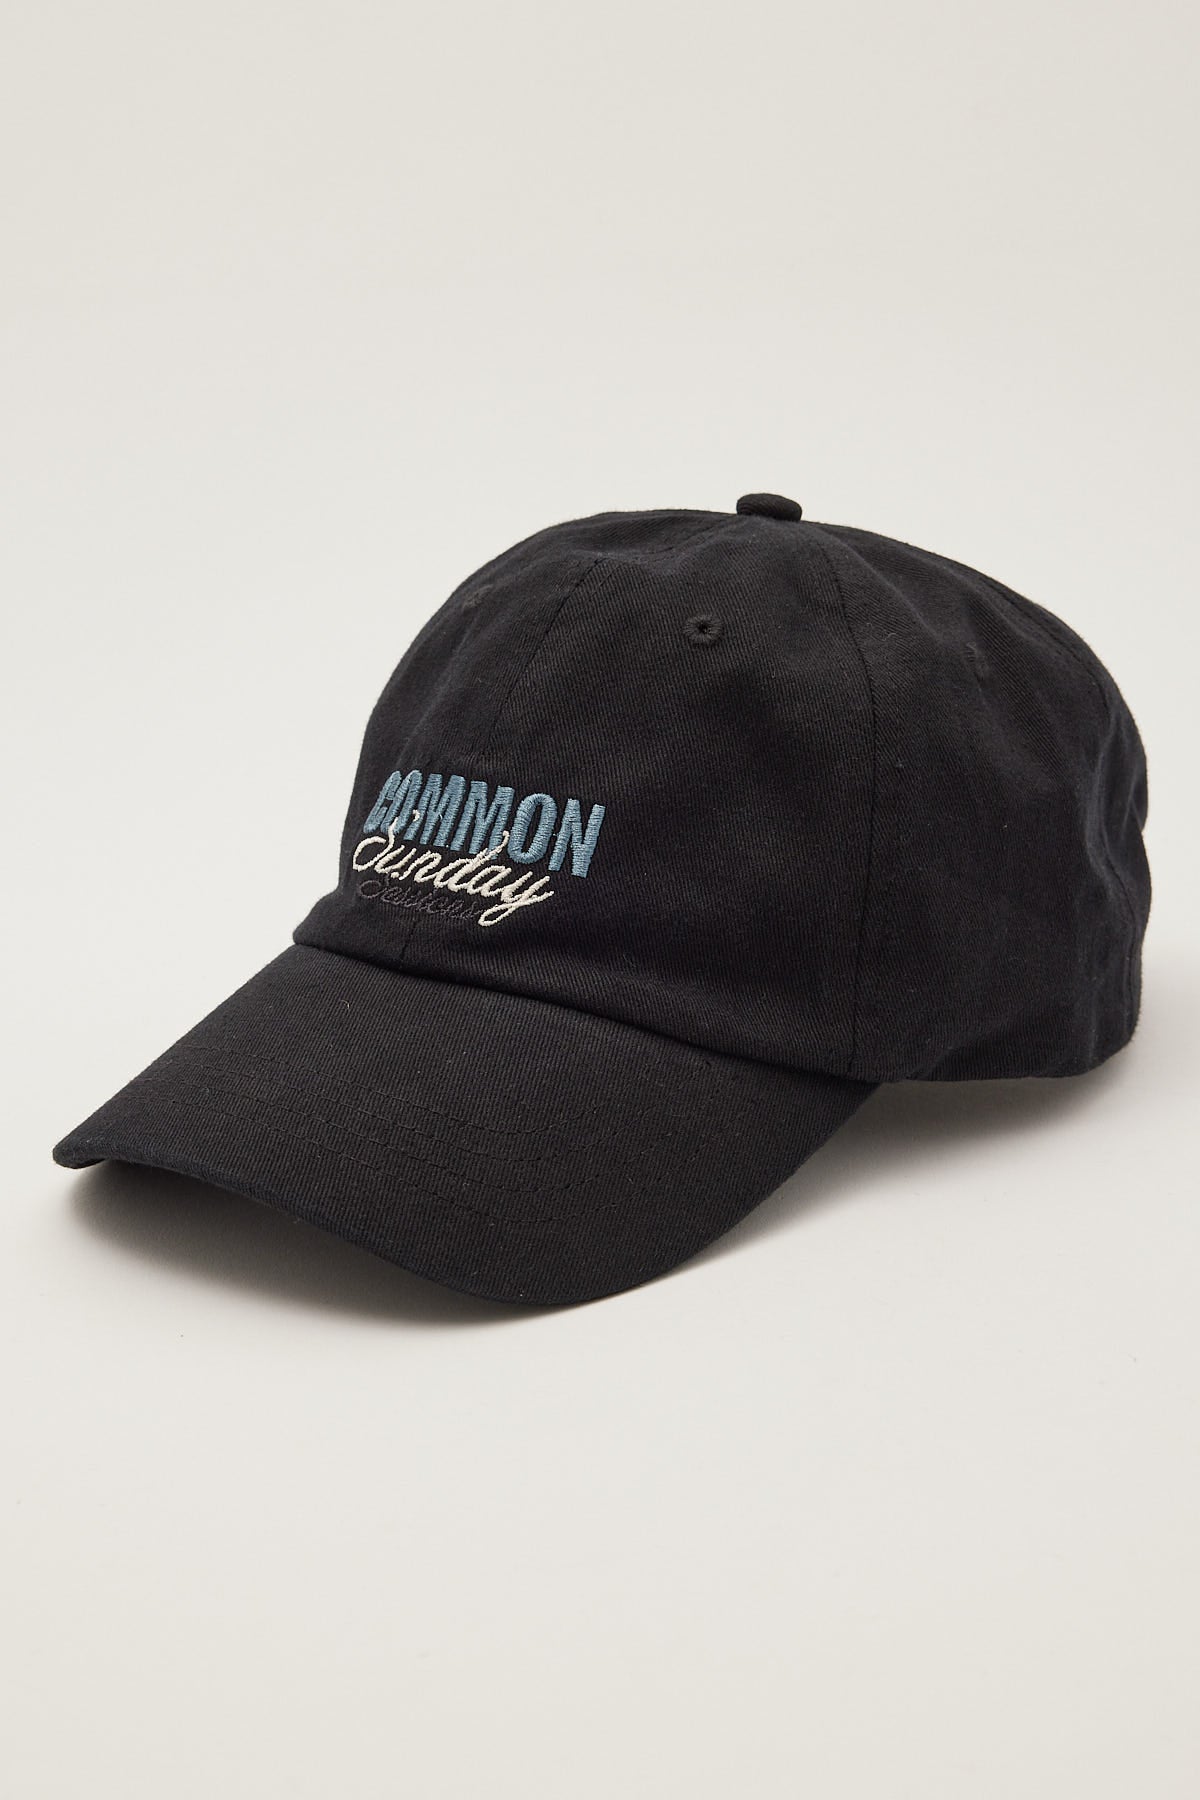 Common Need Sessions Dad Cap Black – Universal Store